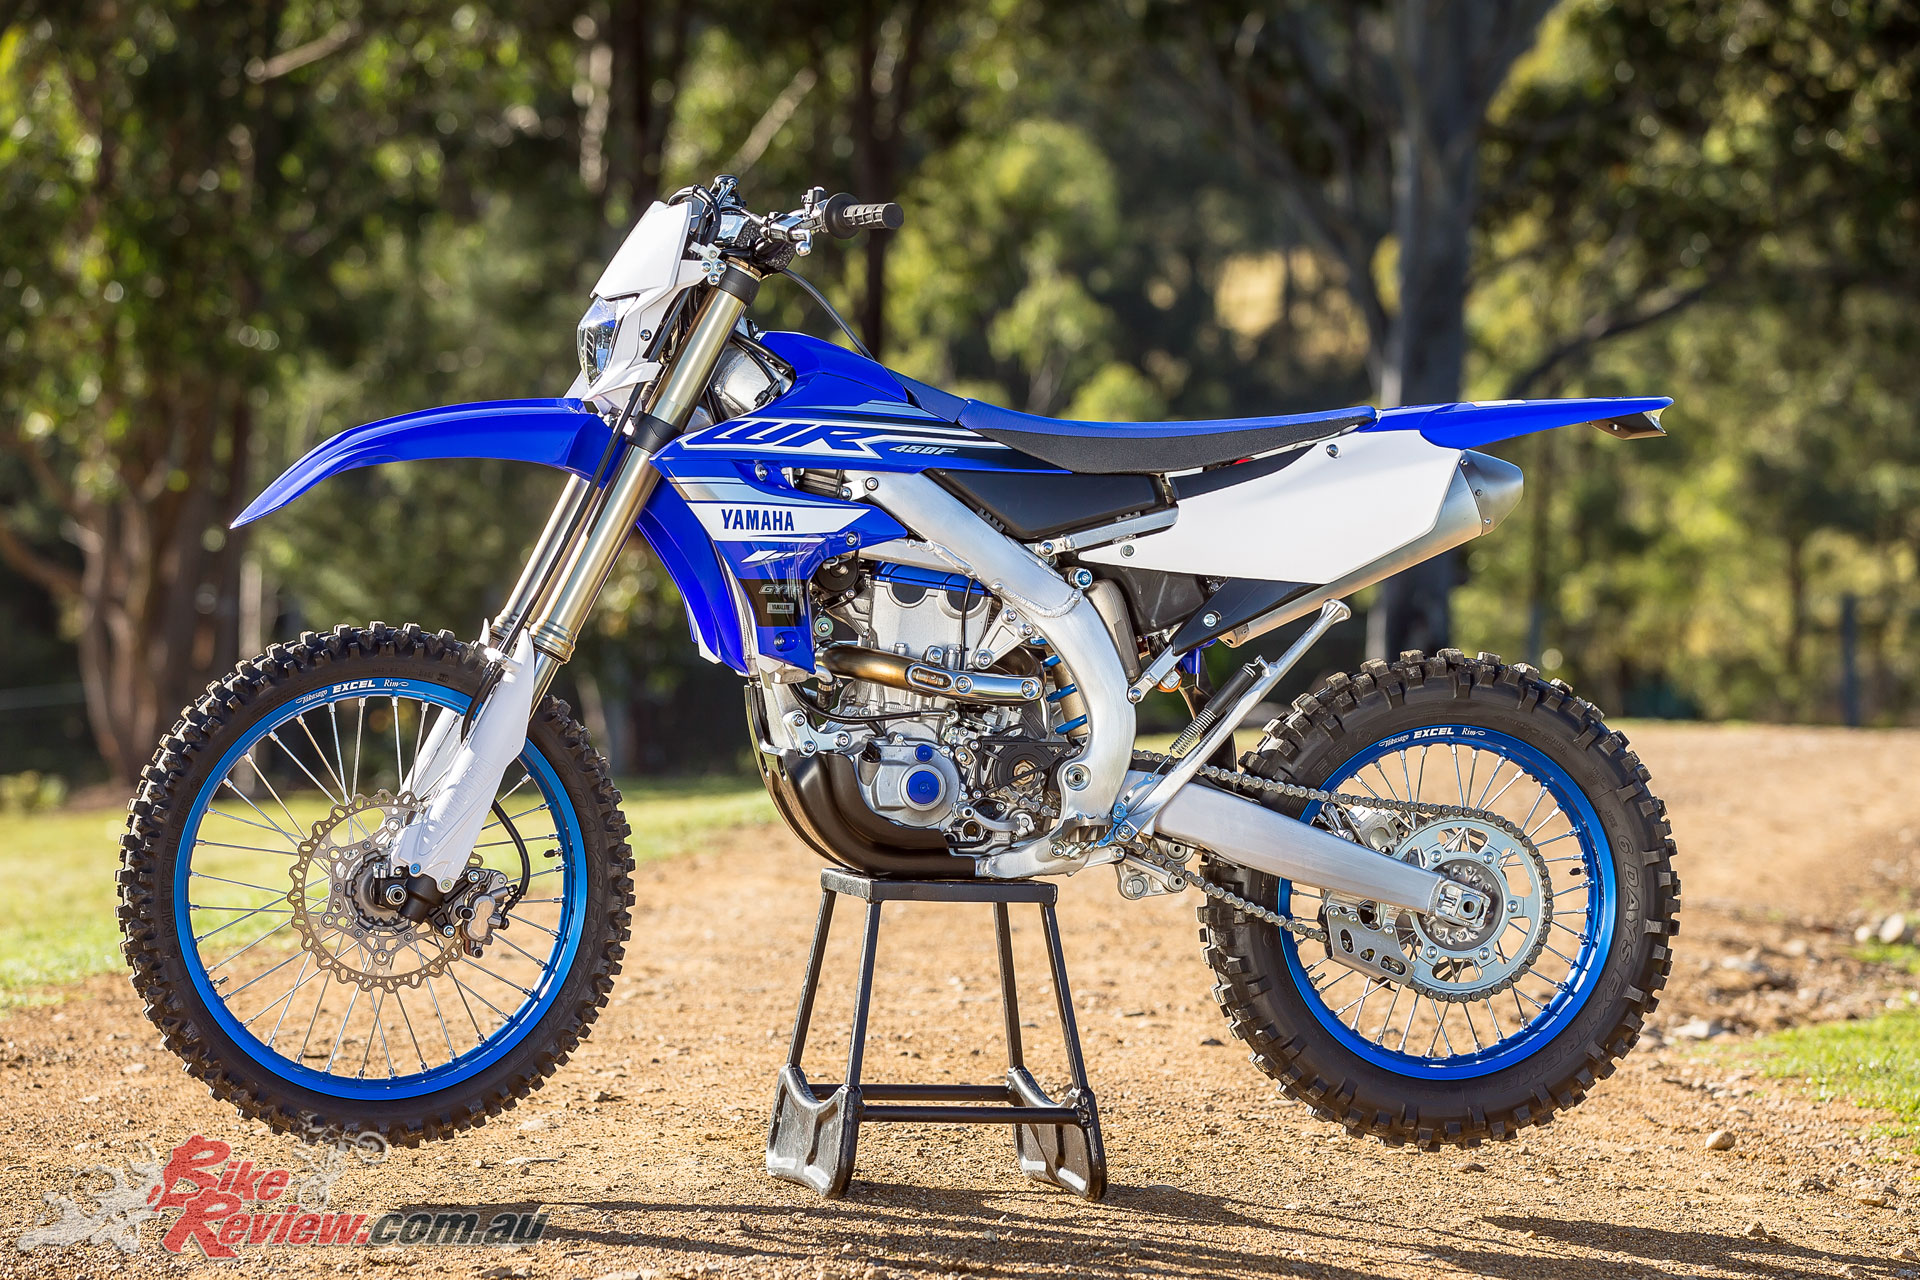 2019 Yamaha WR450F, an all-new ground up redesign based on the YZ450F